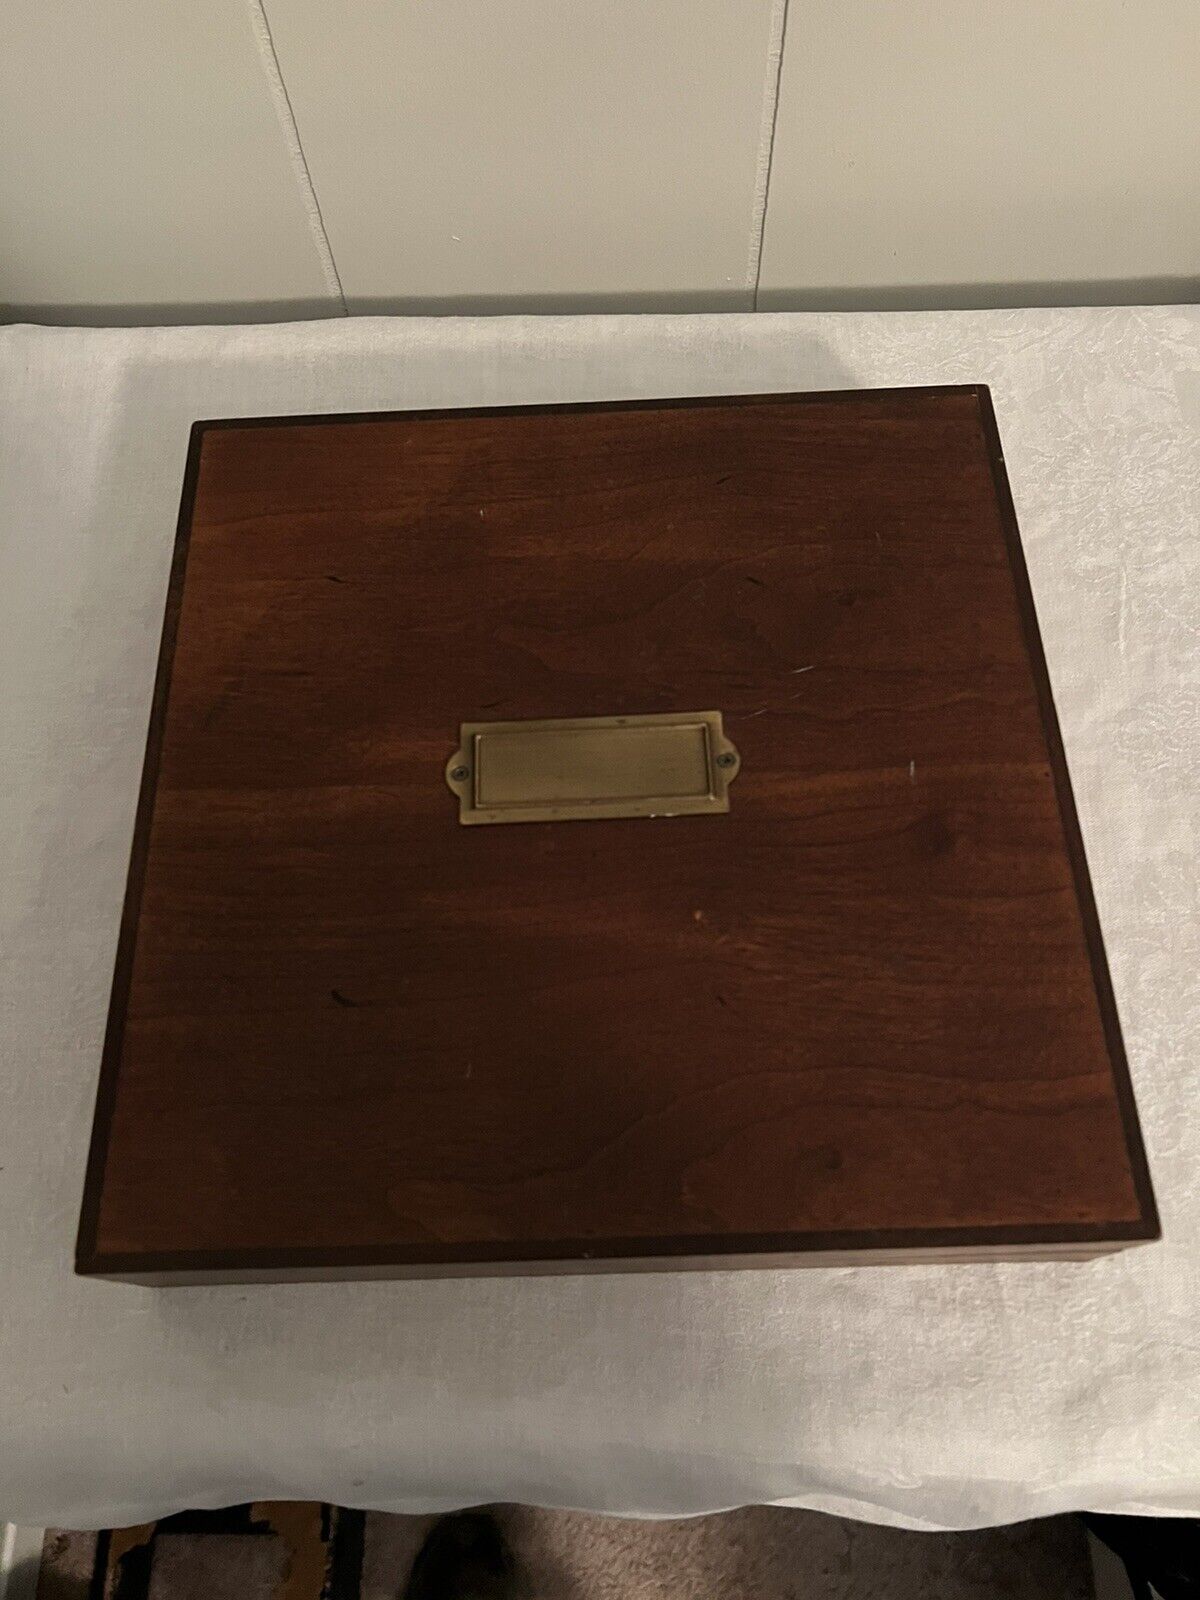 1994 The  Bombay And Company Wooden Box With Hinges Which Are Broke